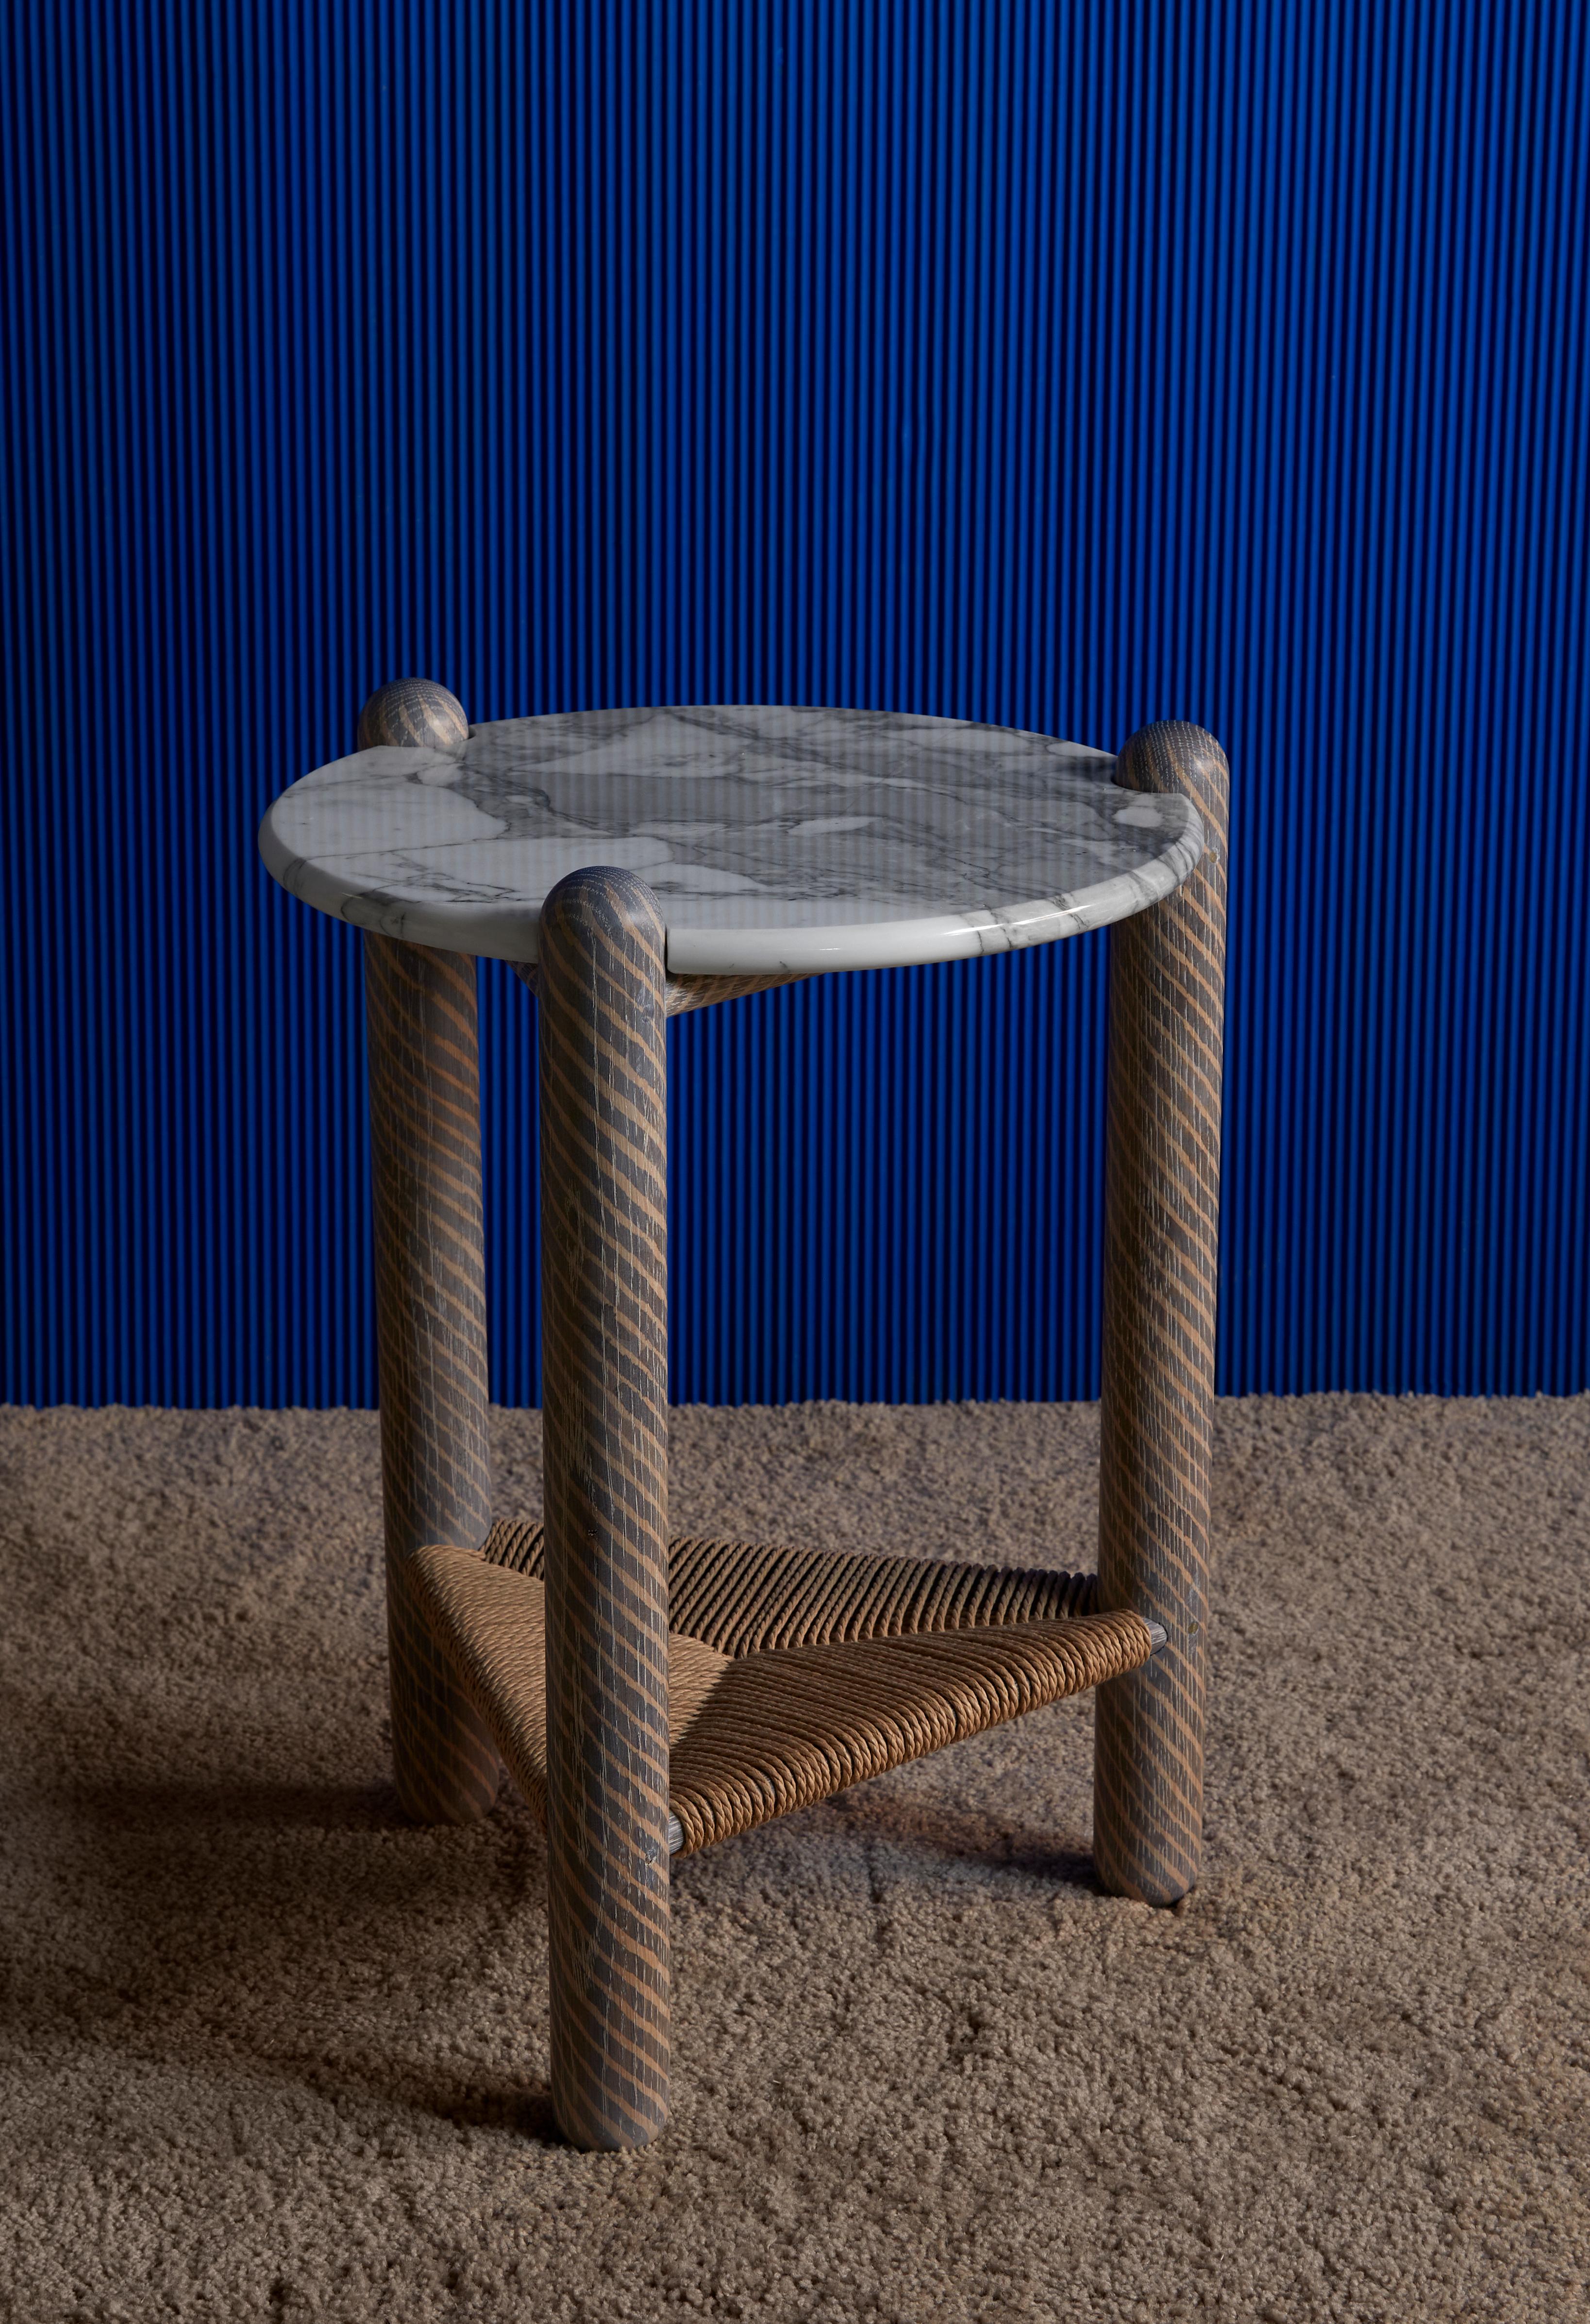 Captain's side table by Hamilton Holmes
Oxalino Collection 
2020
Dimensions: D 38.1, W 38.1, H 50.8 cm
Materials: White oak, Calcatta marble, natural Danish cord, oxidized treatment

These solid oak three legged tables feature handwoven Danish